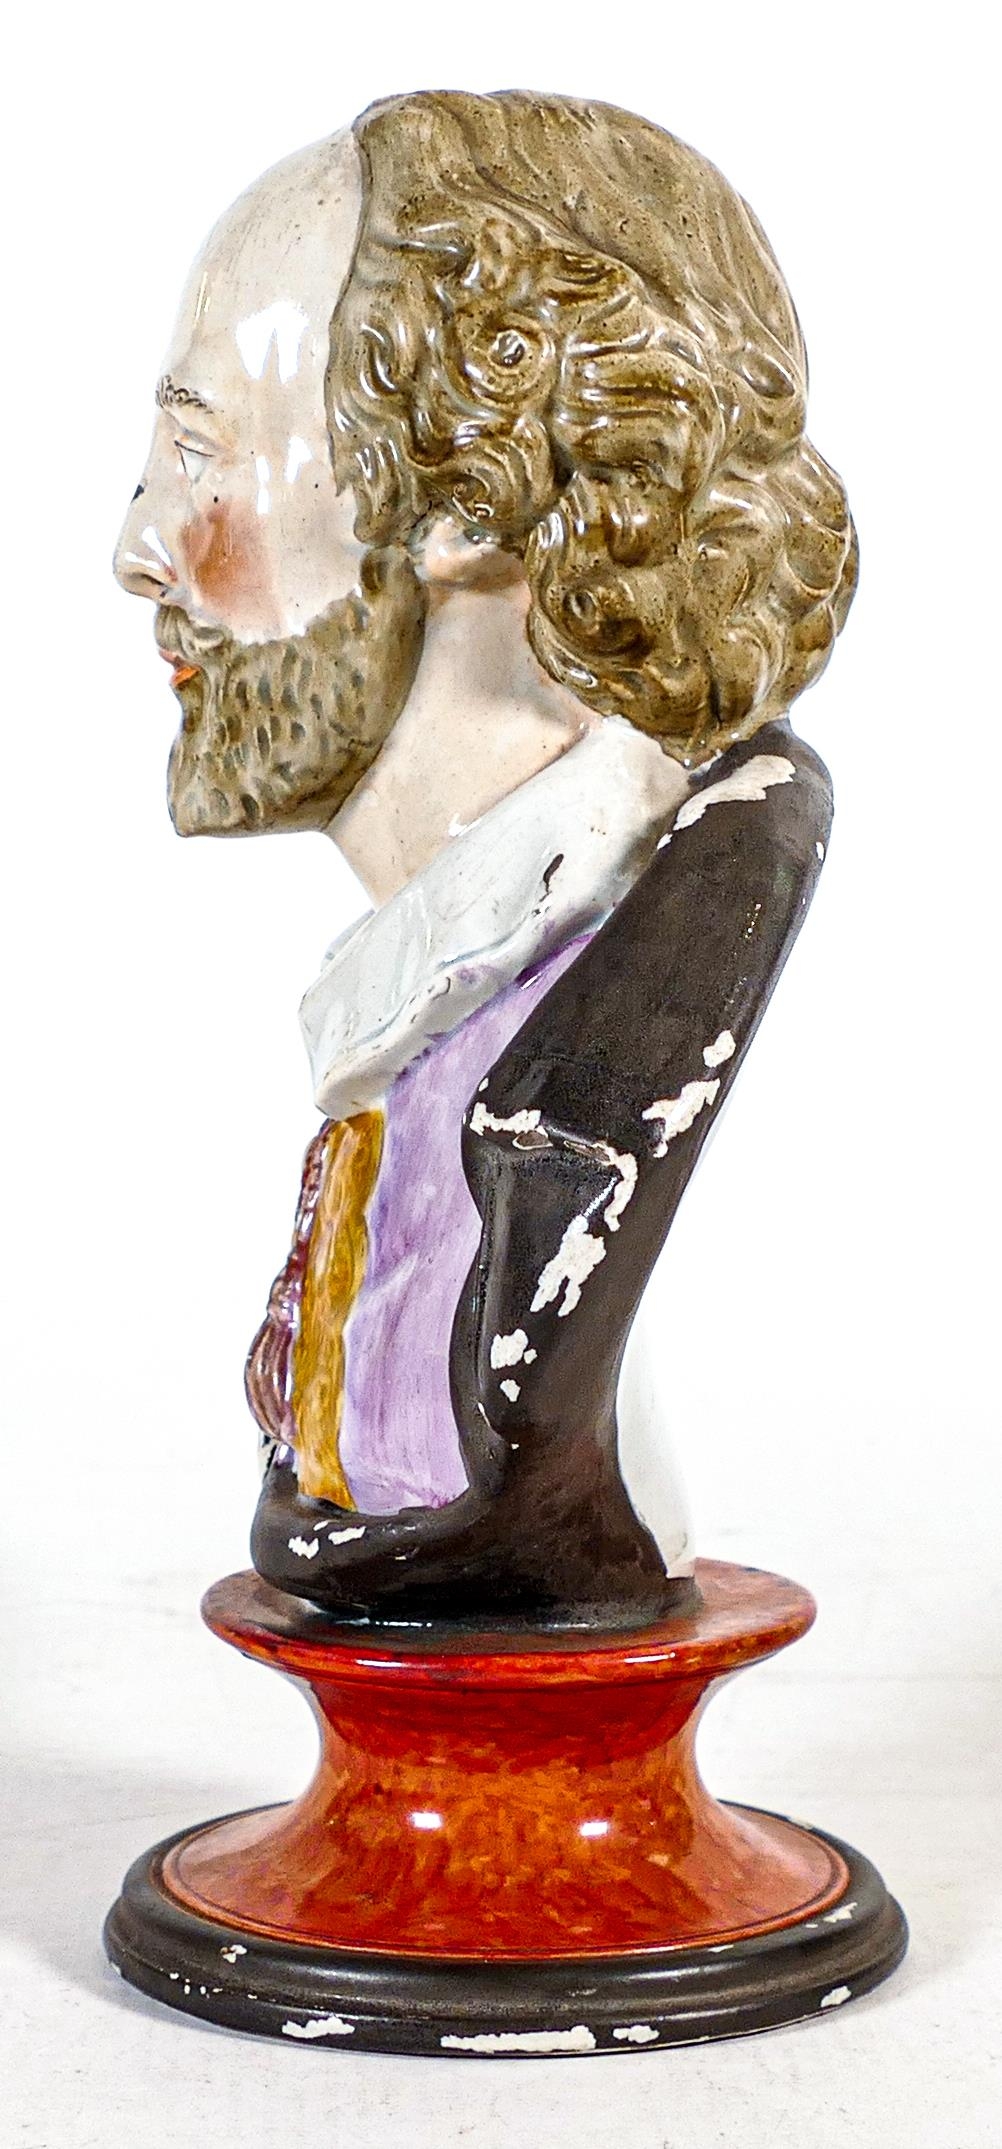 Staffordshire Pearlware bust of William Shakespeare, decorated in overglaze enamels on red patterned - Image 3 of 4